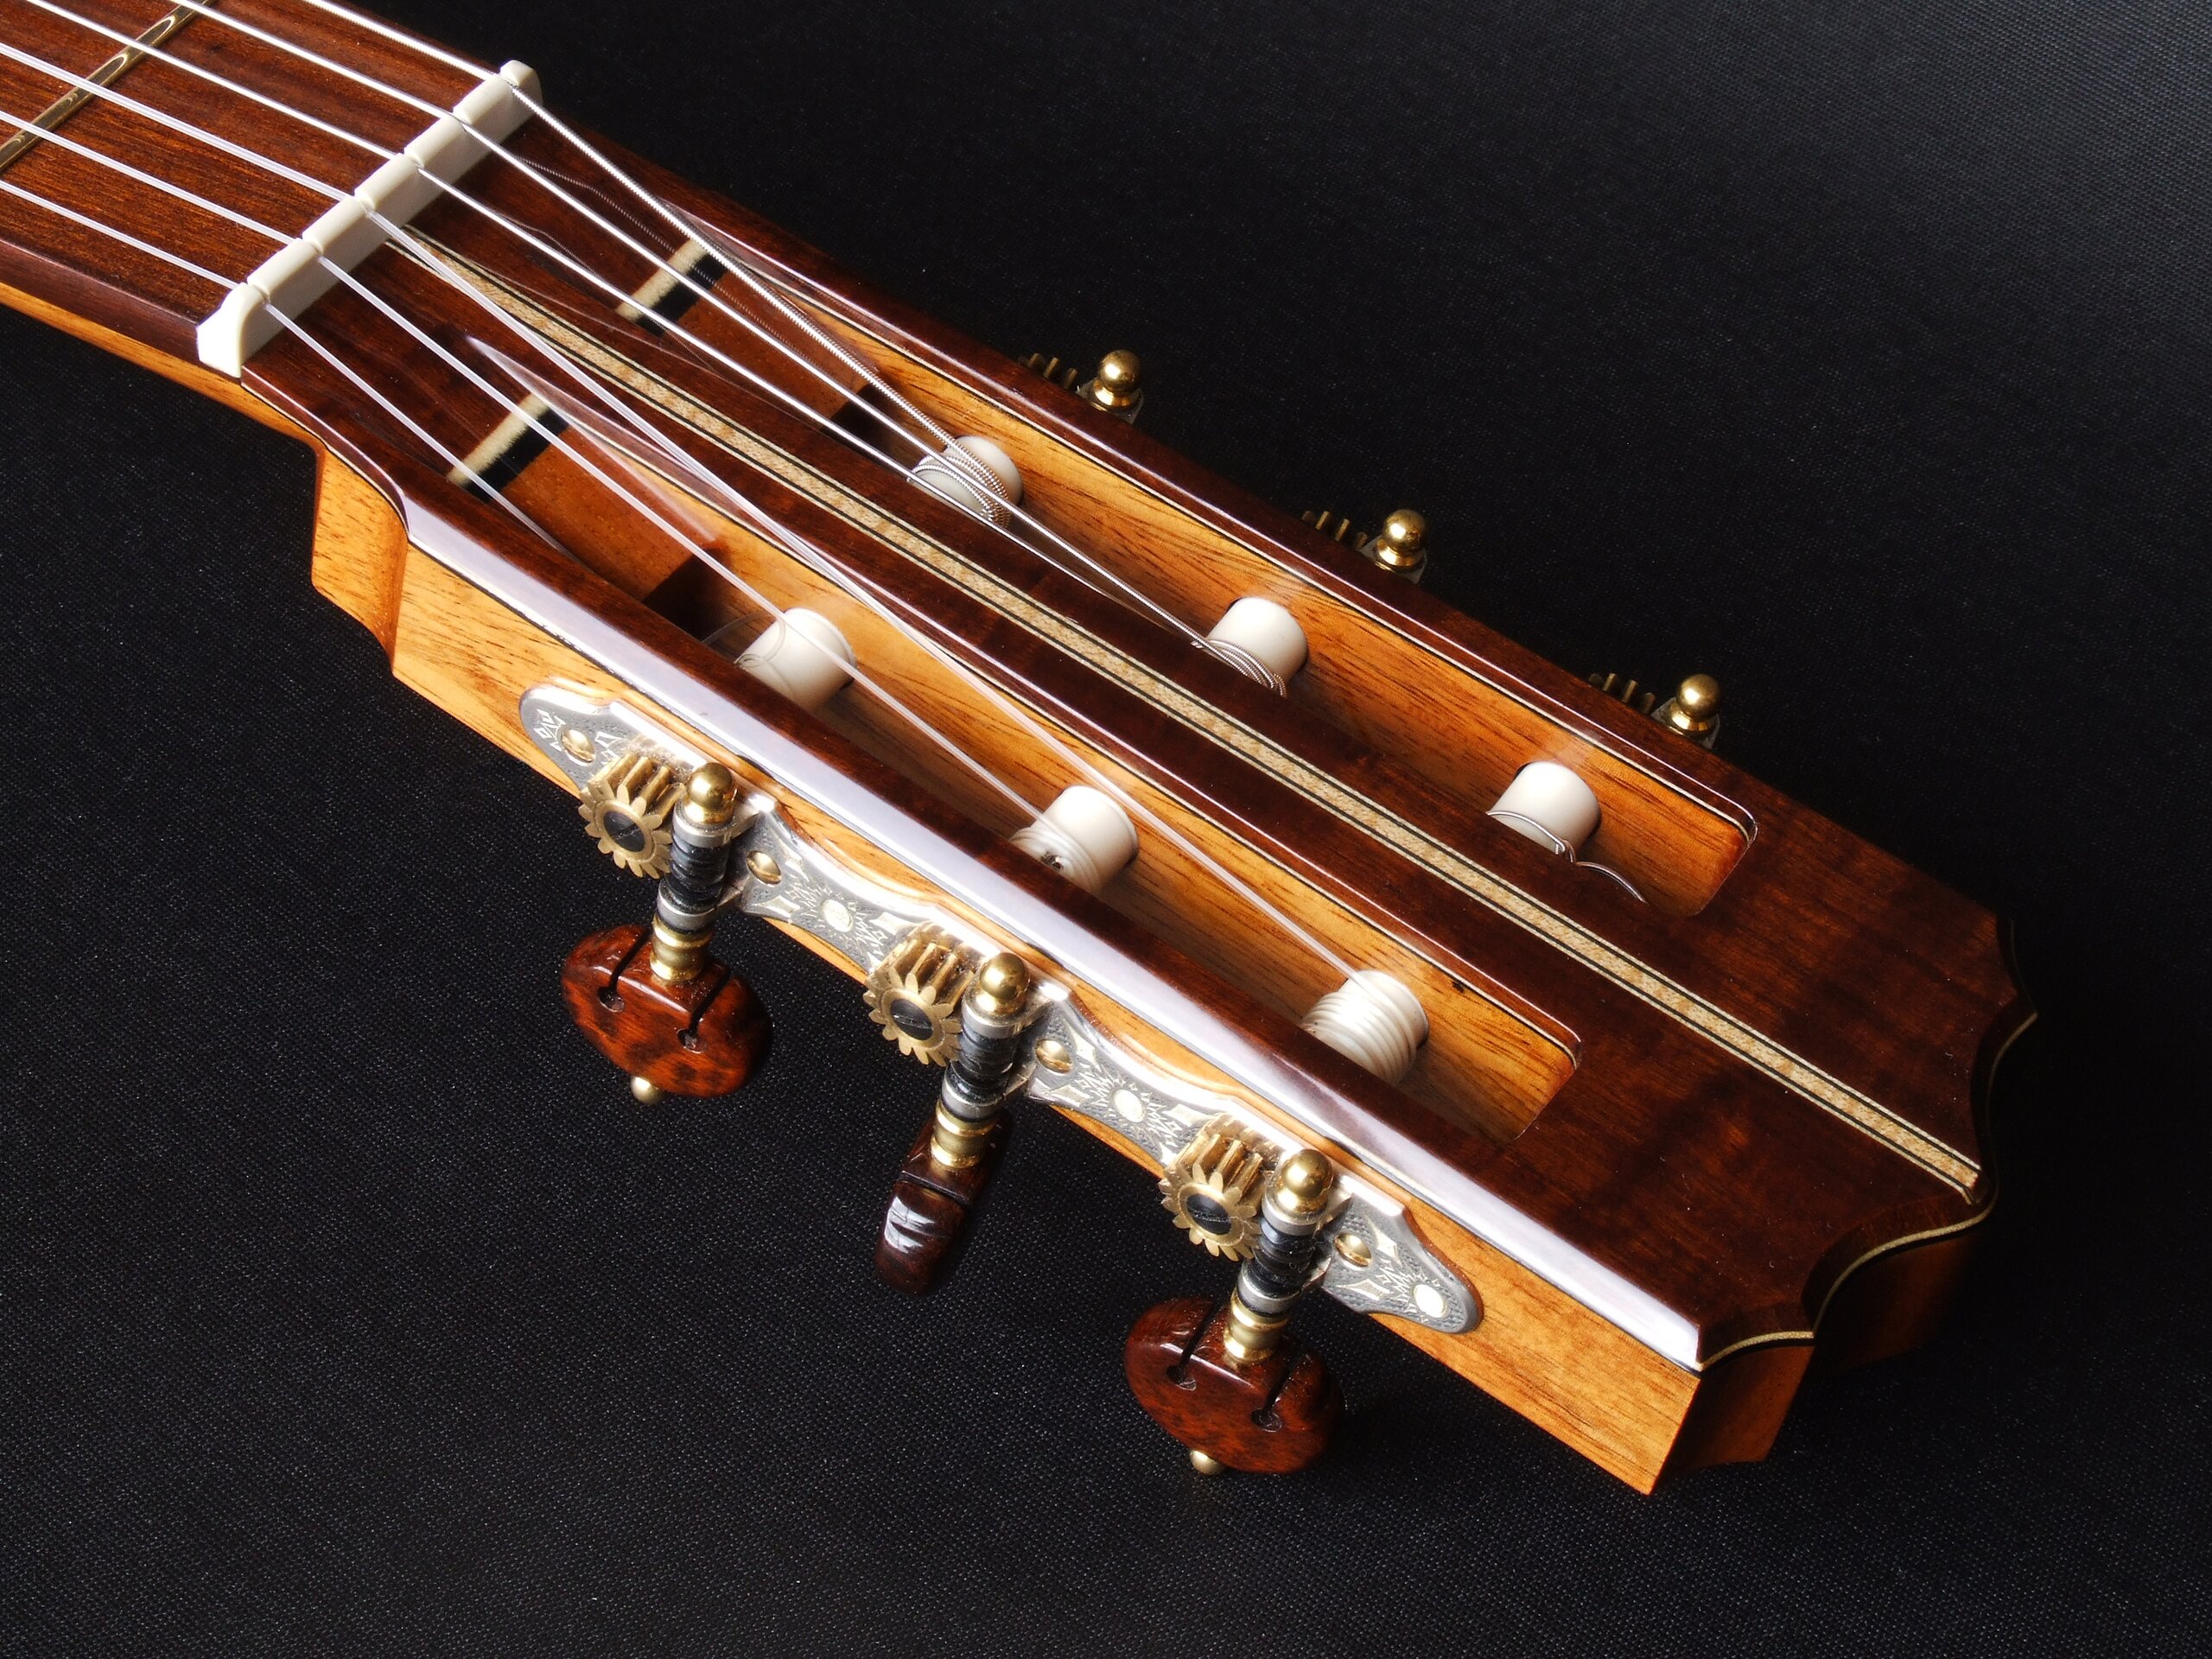 Custom guitars. Gidgee faced headstock with Rodgers tuners on a classical guitar